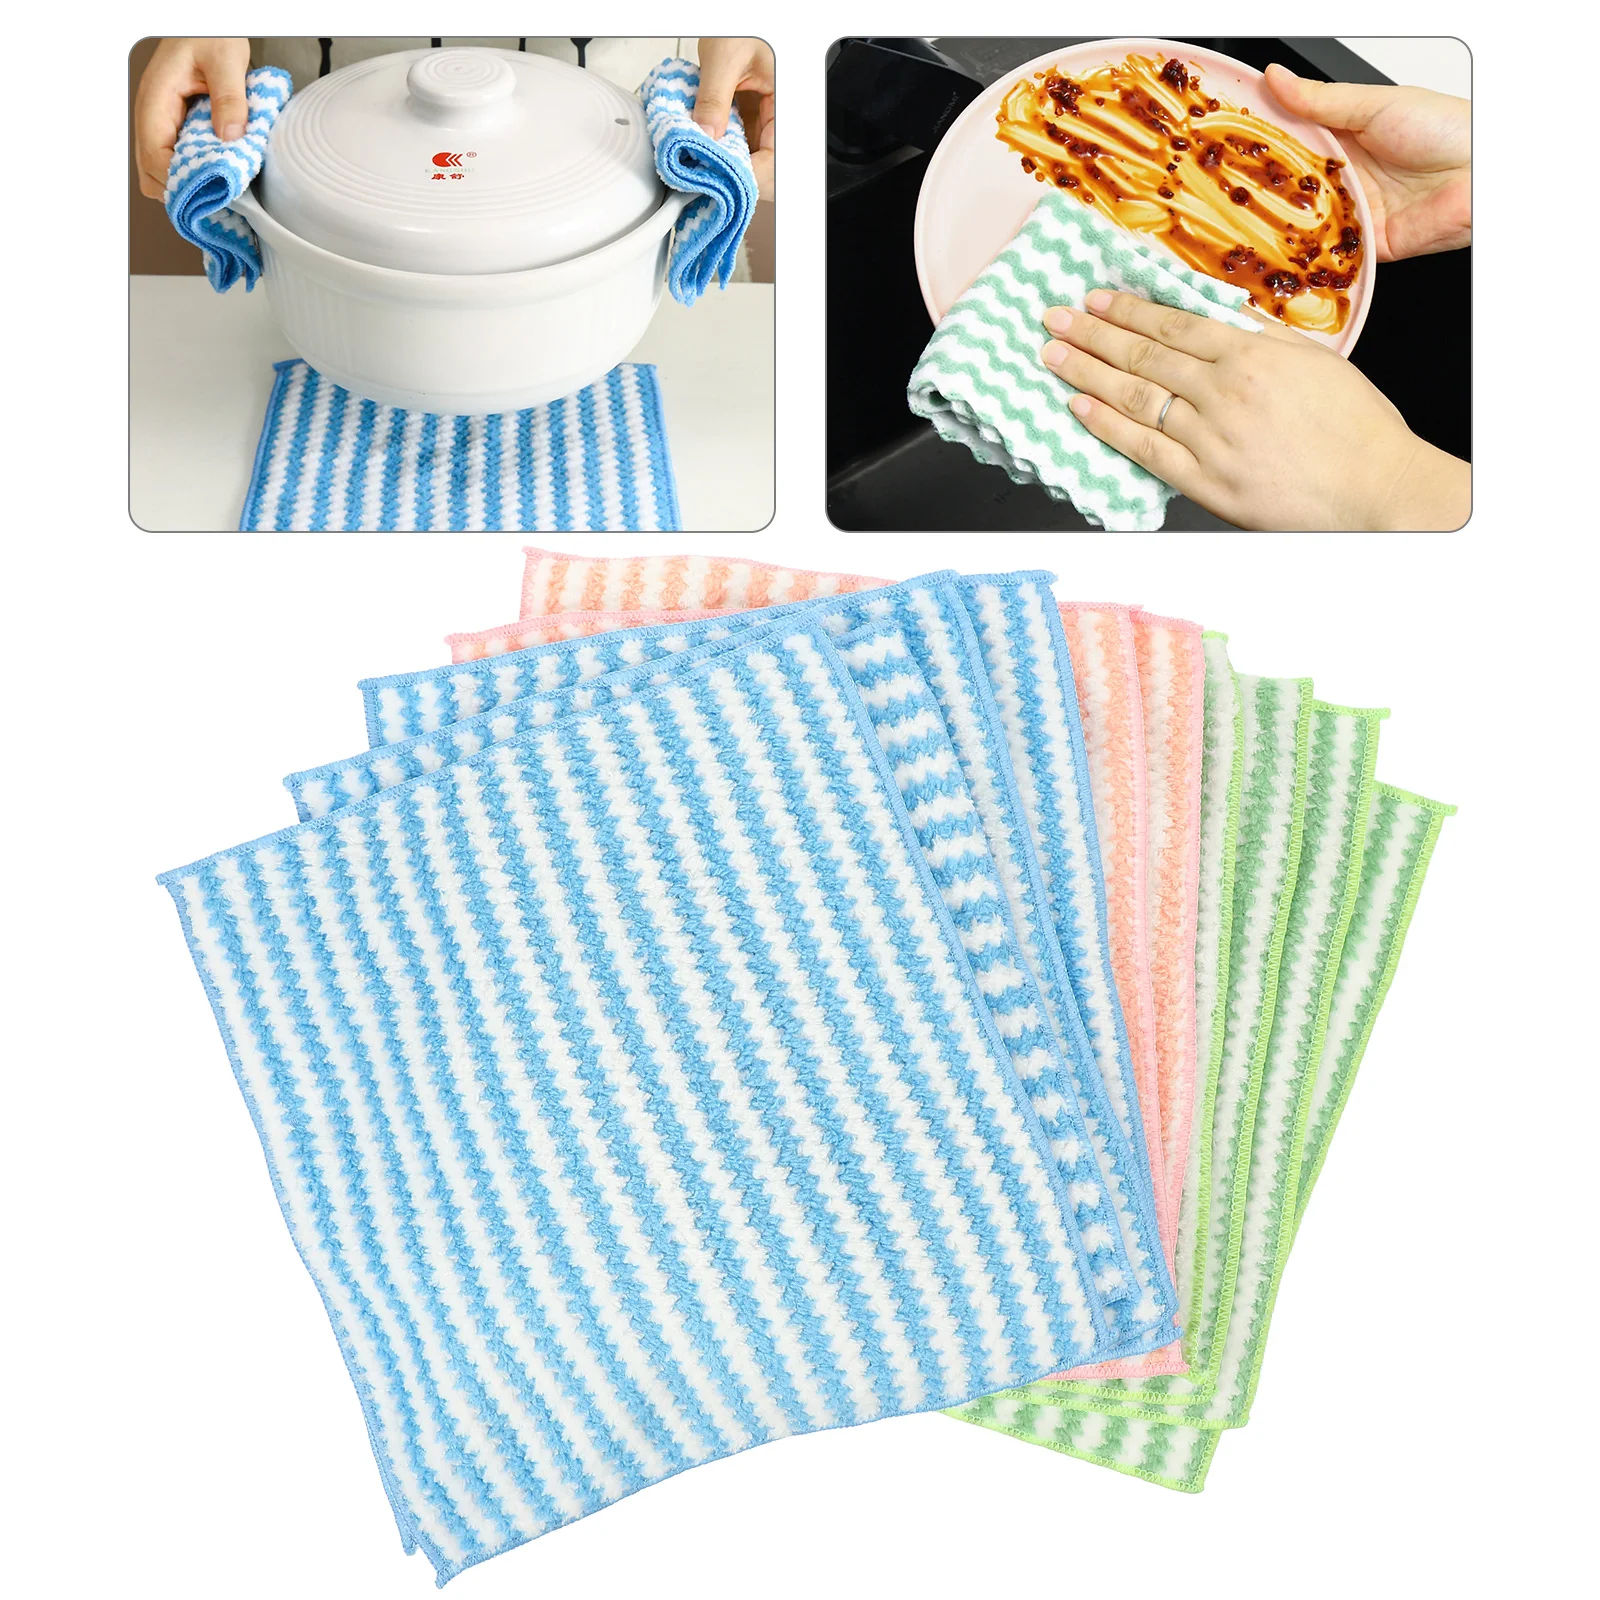 

Towels Rags Dish Cleaning Kitchen Washing Towel Cloths Cloth Microfiber Disheswiping Wash Washcloth Absorbent Scrubbing Car